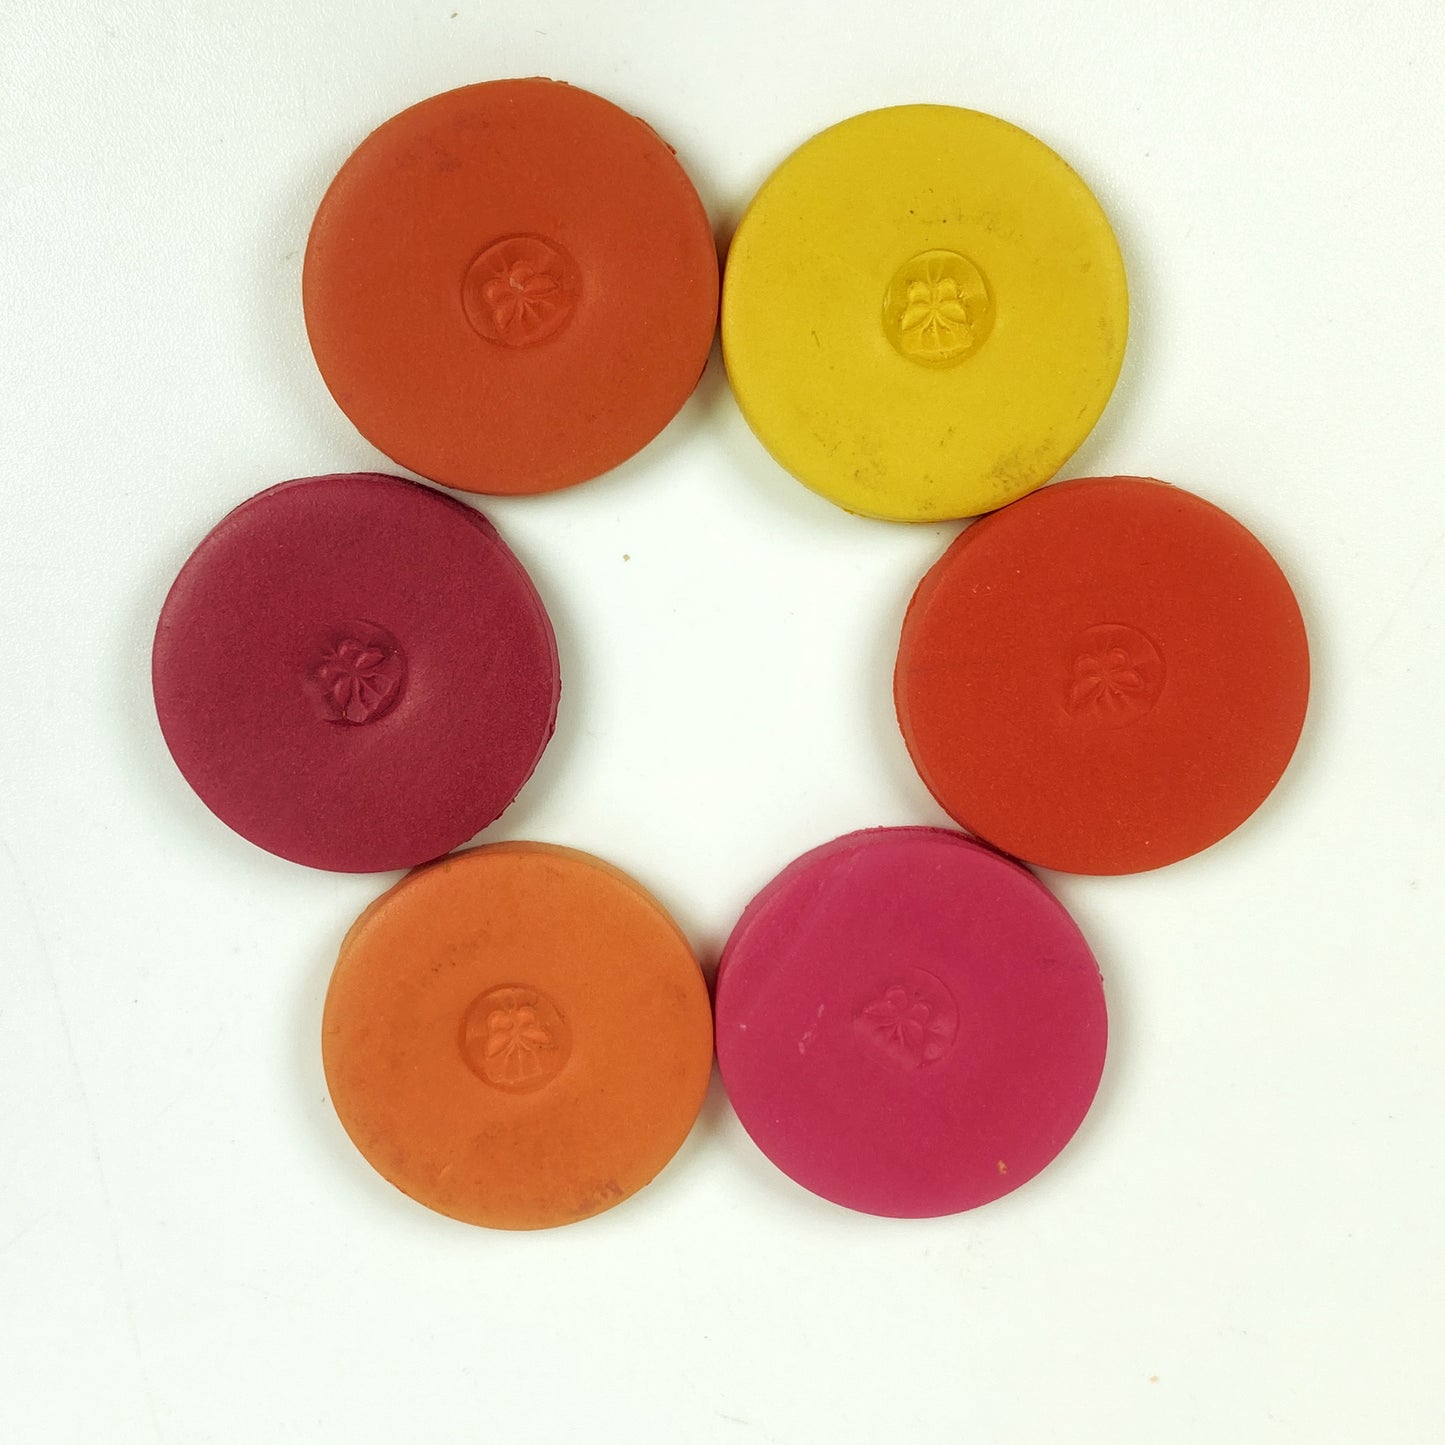 Discs of Polymer Clay in all 6 brick colors of this palette, arranged in a ring.